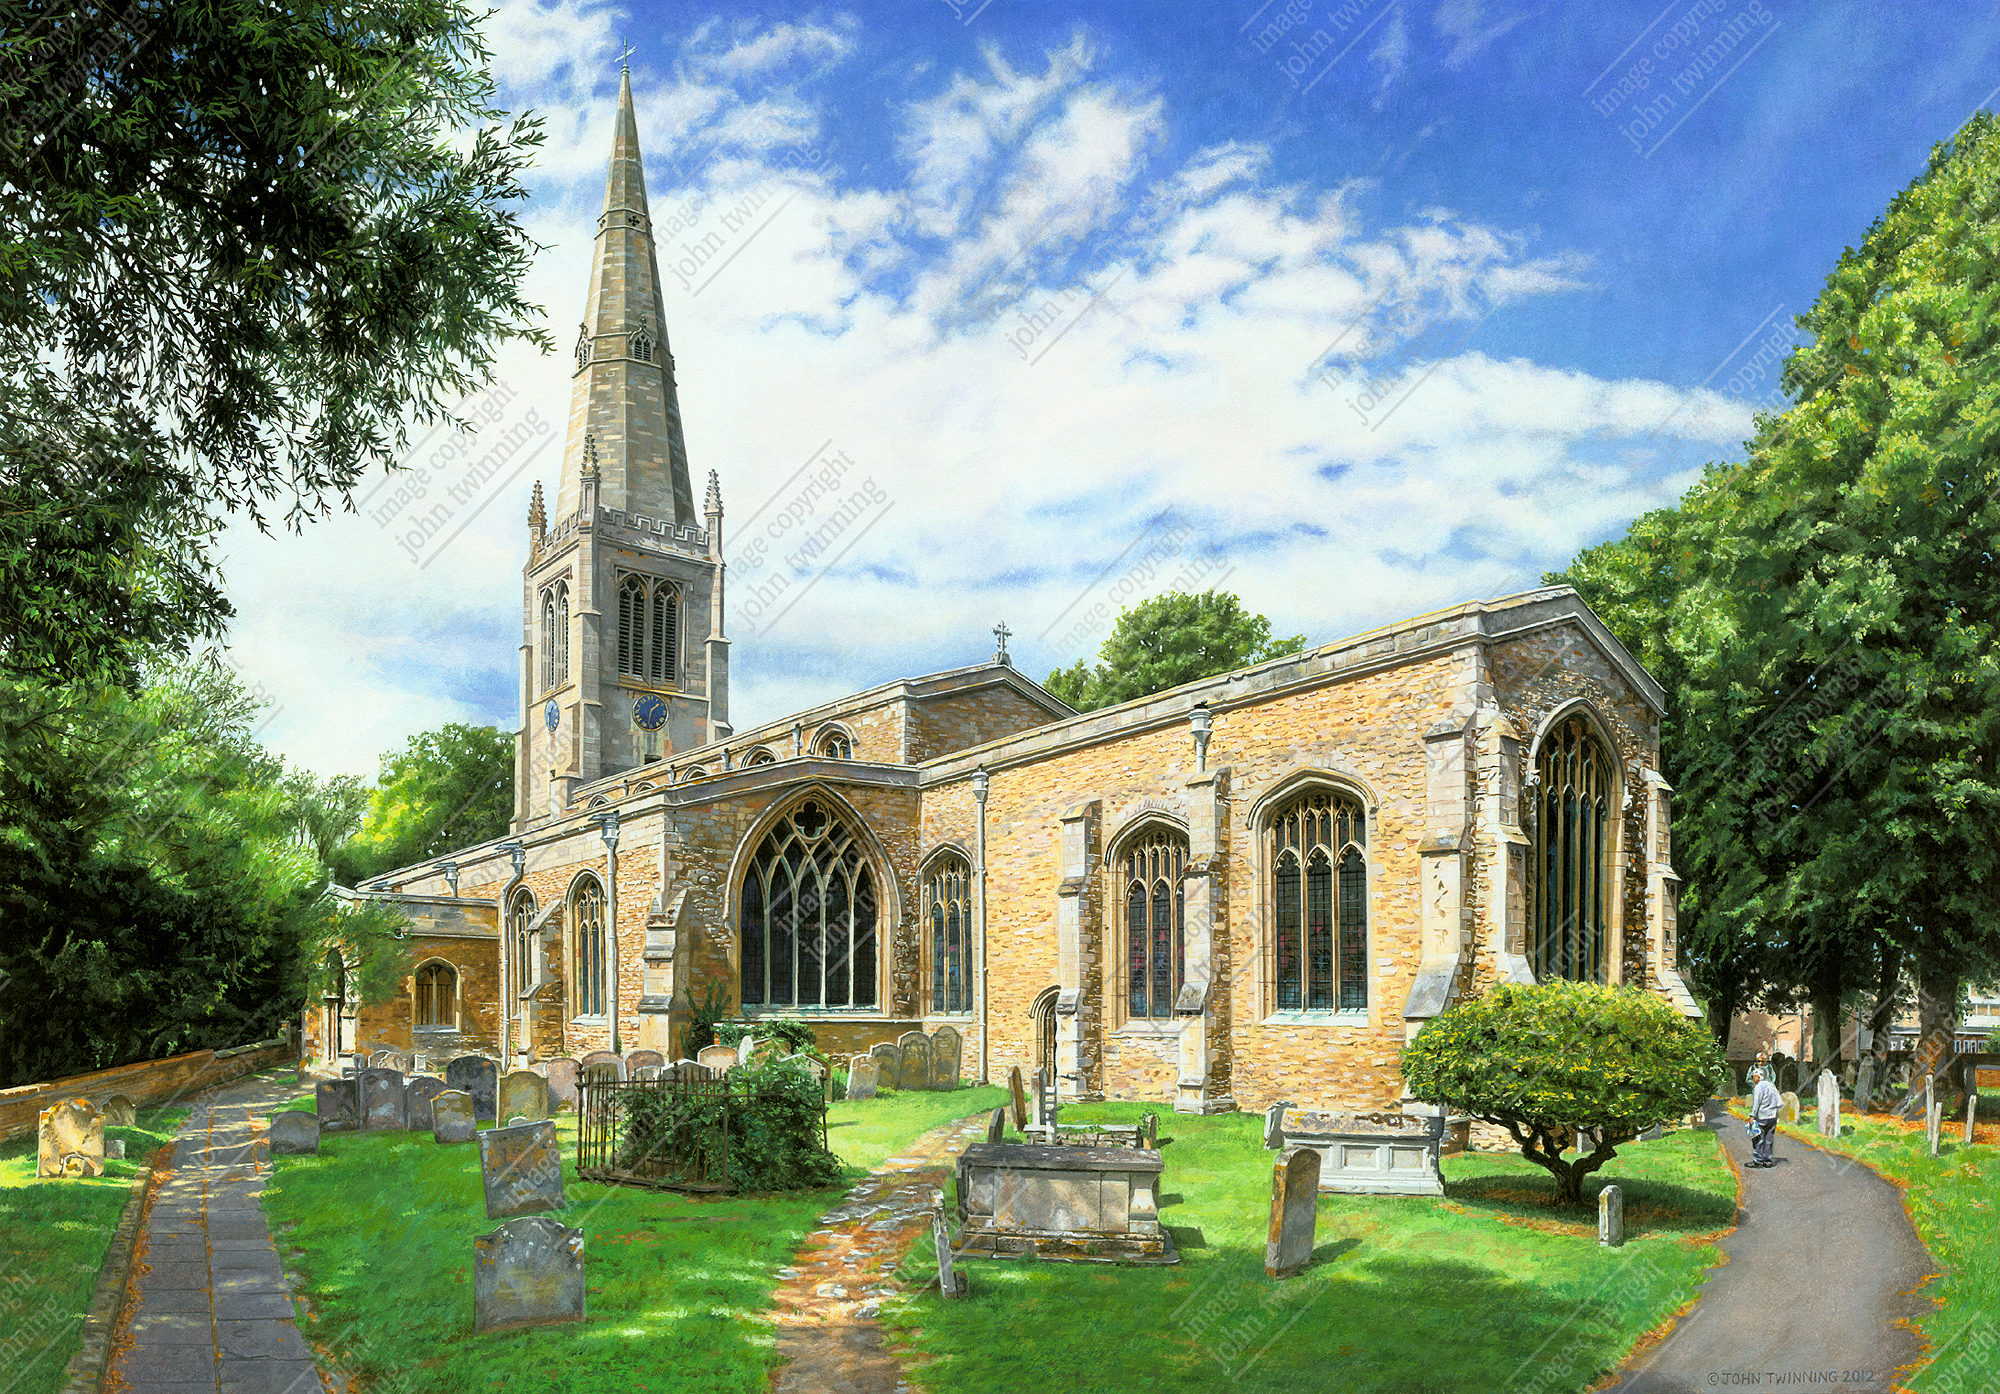 'All Saints, The Parish Church Of St. Ives, Cambridgeshire' - art print from a commissioned painting of this town centre church